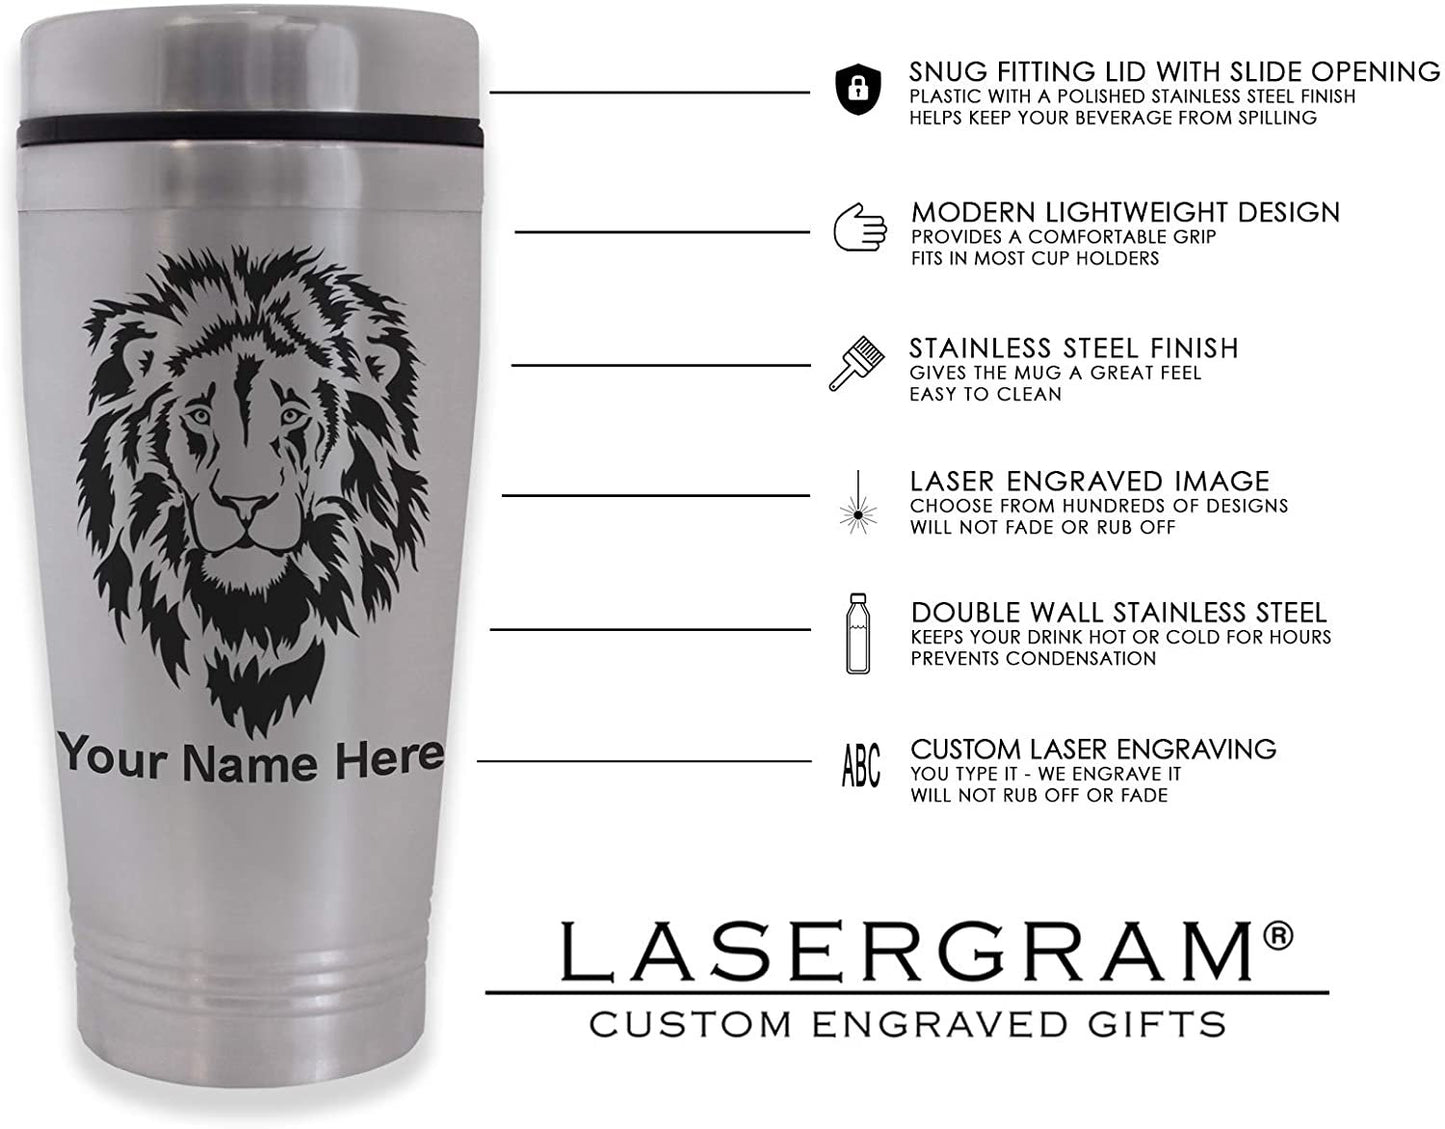 Commuter Travel Mug, Tennis Rackets, Personalized Engraving Included